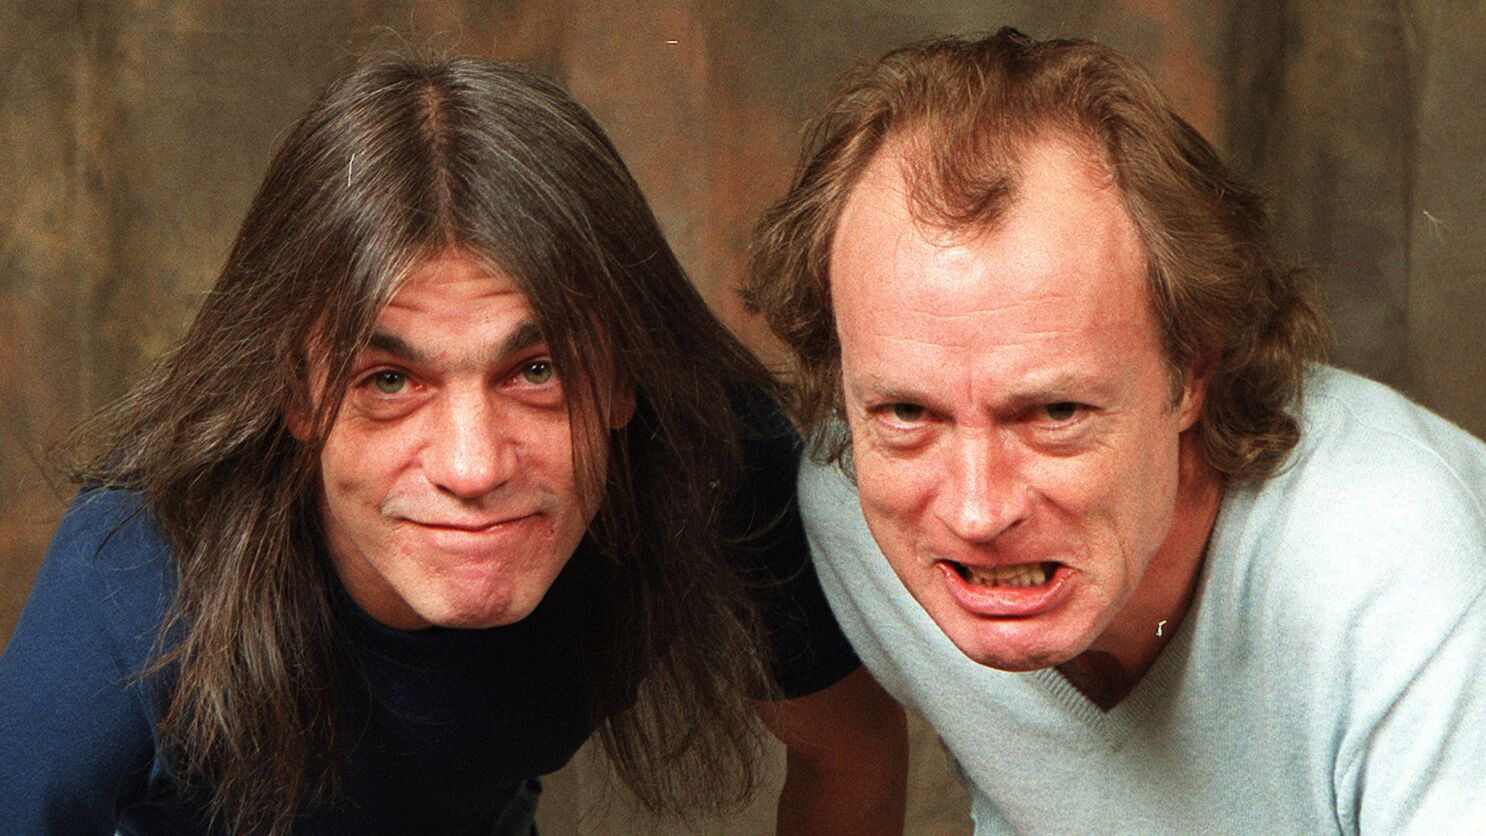 Malcolm Young left AC/DC because of dementia, family Los Angeles Times